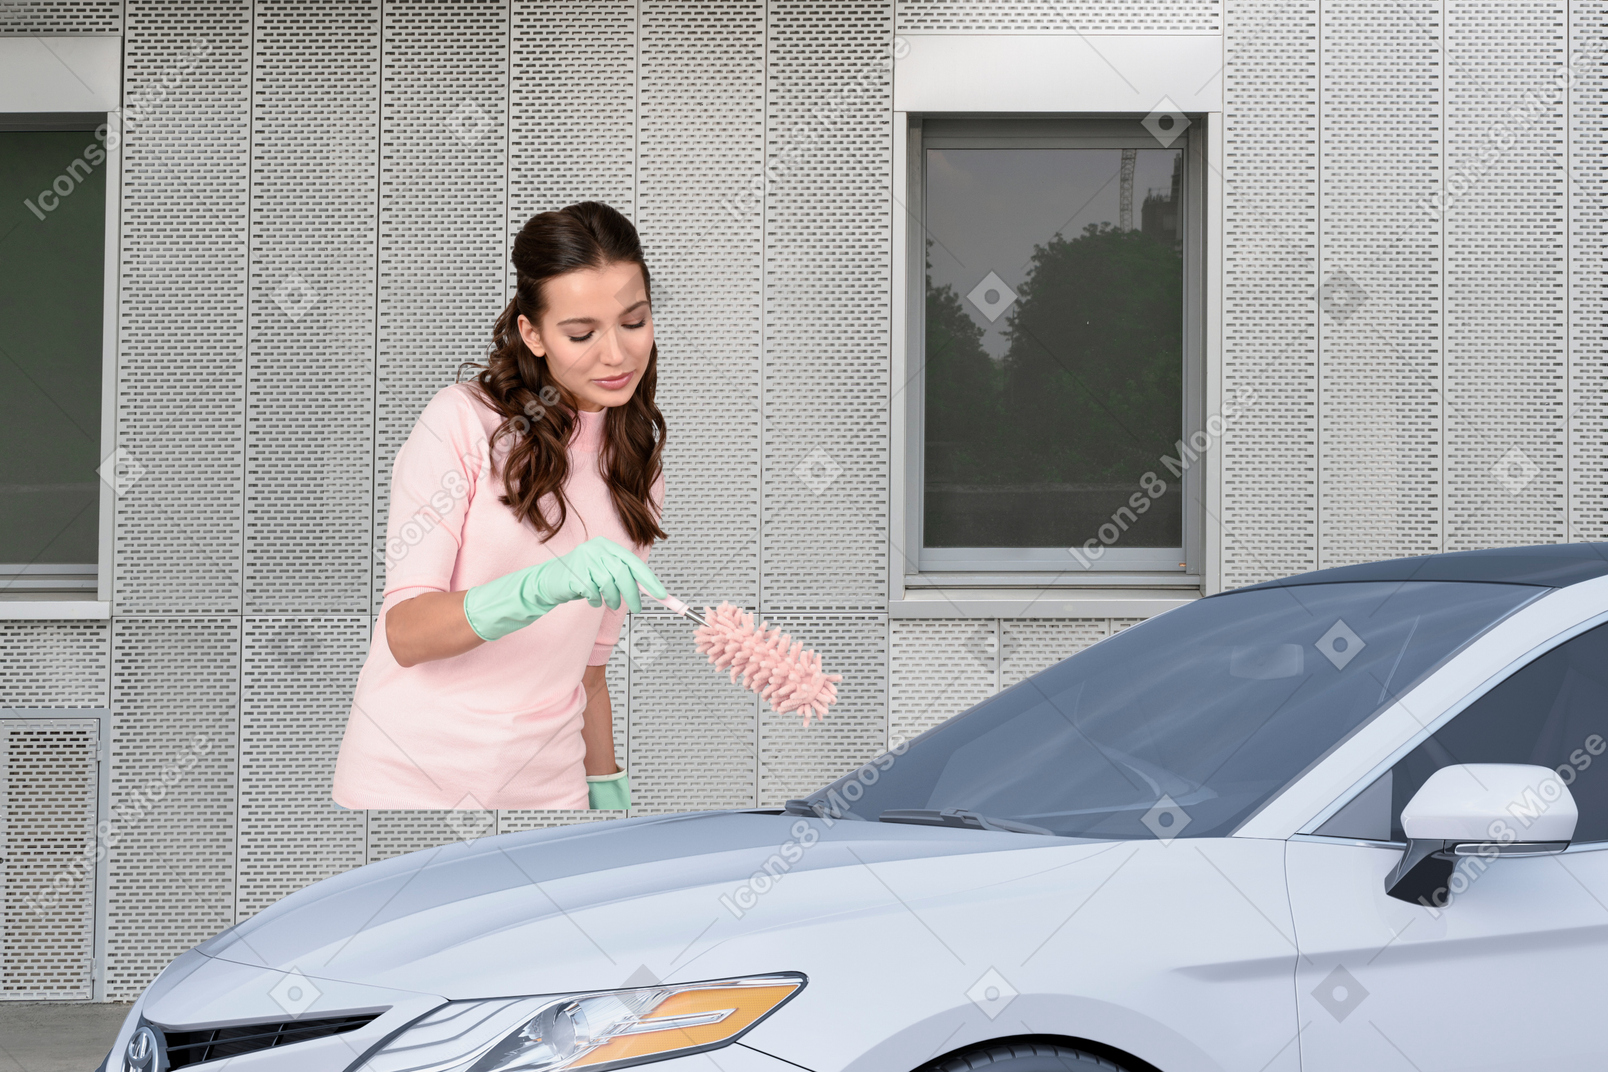 A woman in a pink shirt is cleaning a car